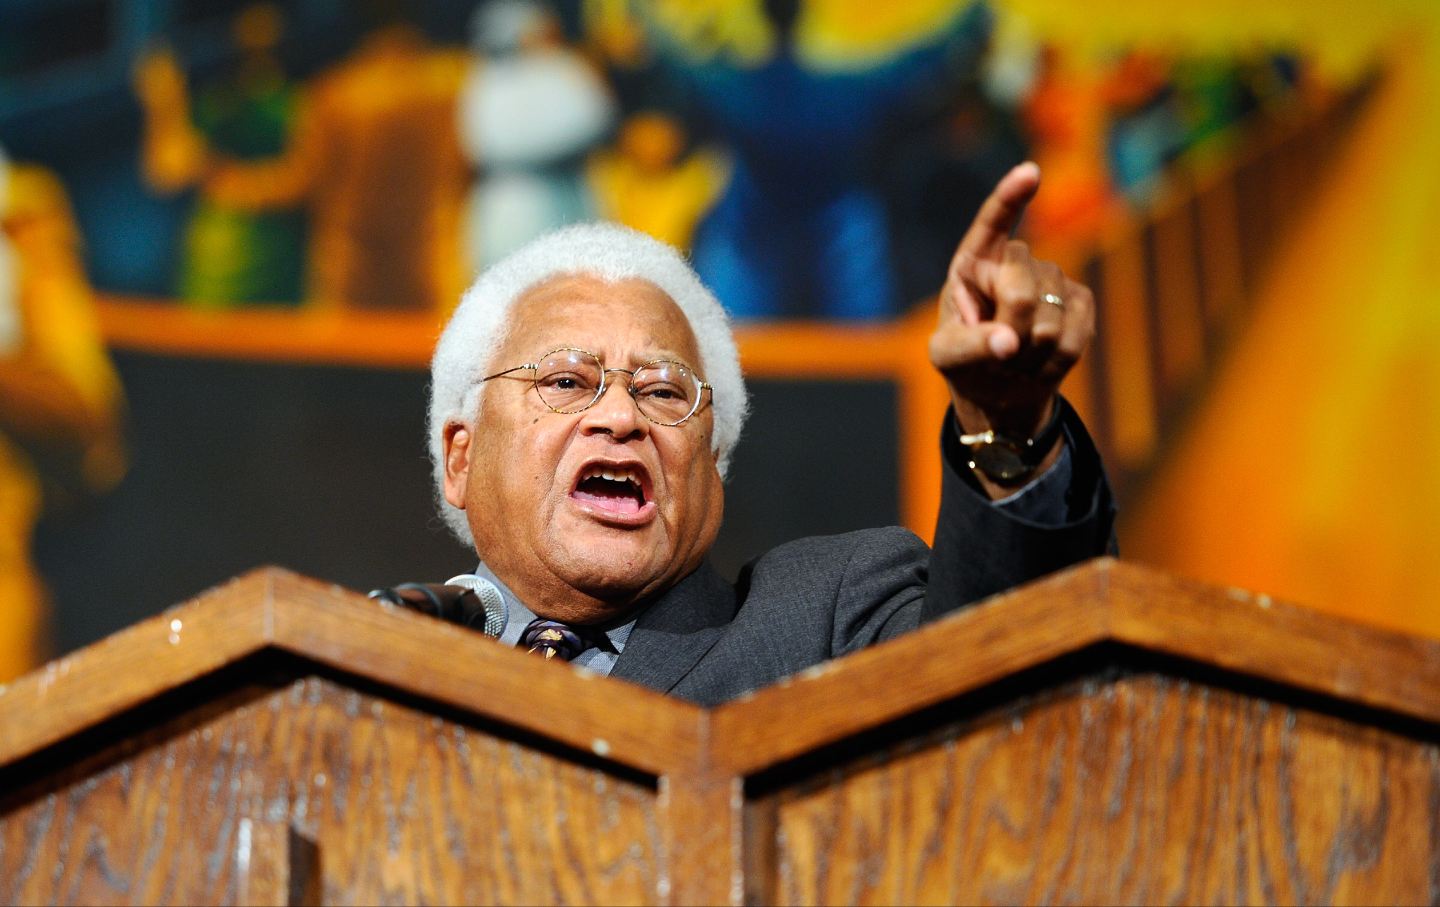 The Rev. James Lawson speaks from the pulpit of the First AME Church during an event in solidarity with union workers in Wisconsin on the anniversary of Dr. Martin Luther King Jr.’s assassination on April 4, 2011 in Los Angeles, California.